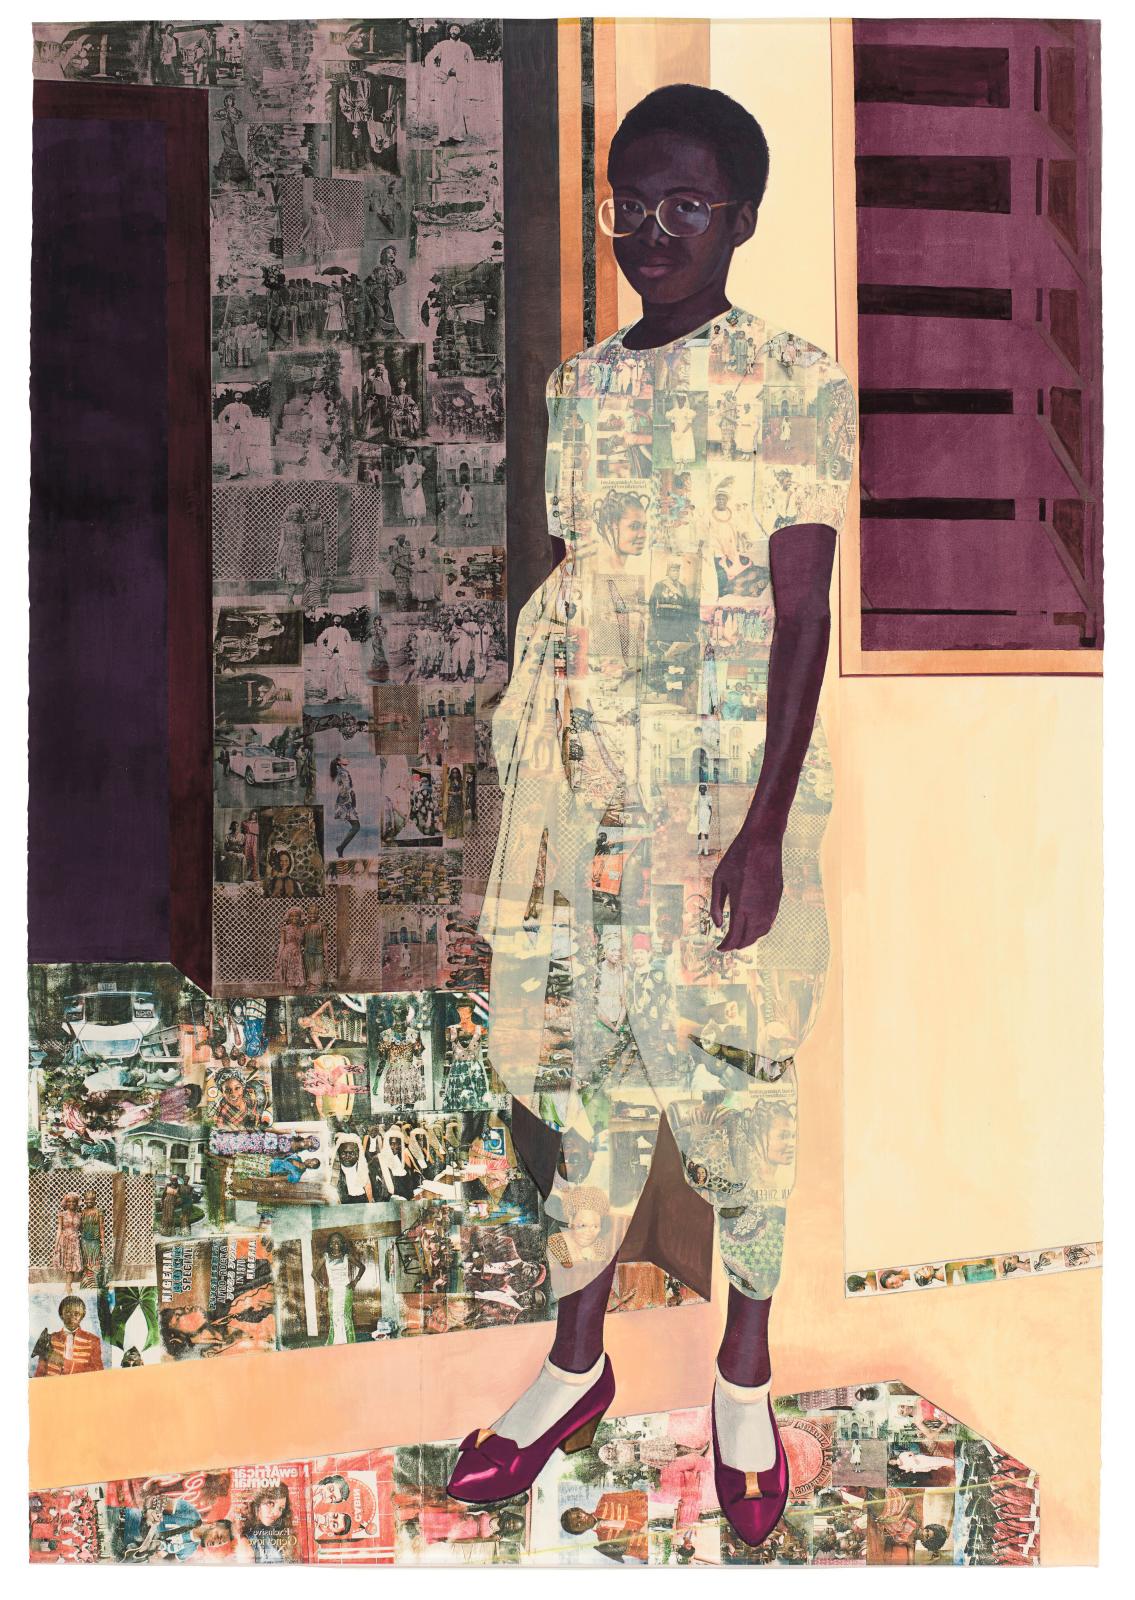 Njideka Akunyili Crosby (né en 1982), The Beautyful Ones, technique mixte, 243 x 170 cm. @ Christie’s Limited Images 2022